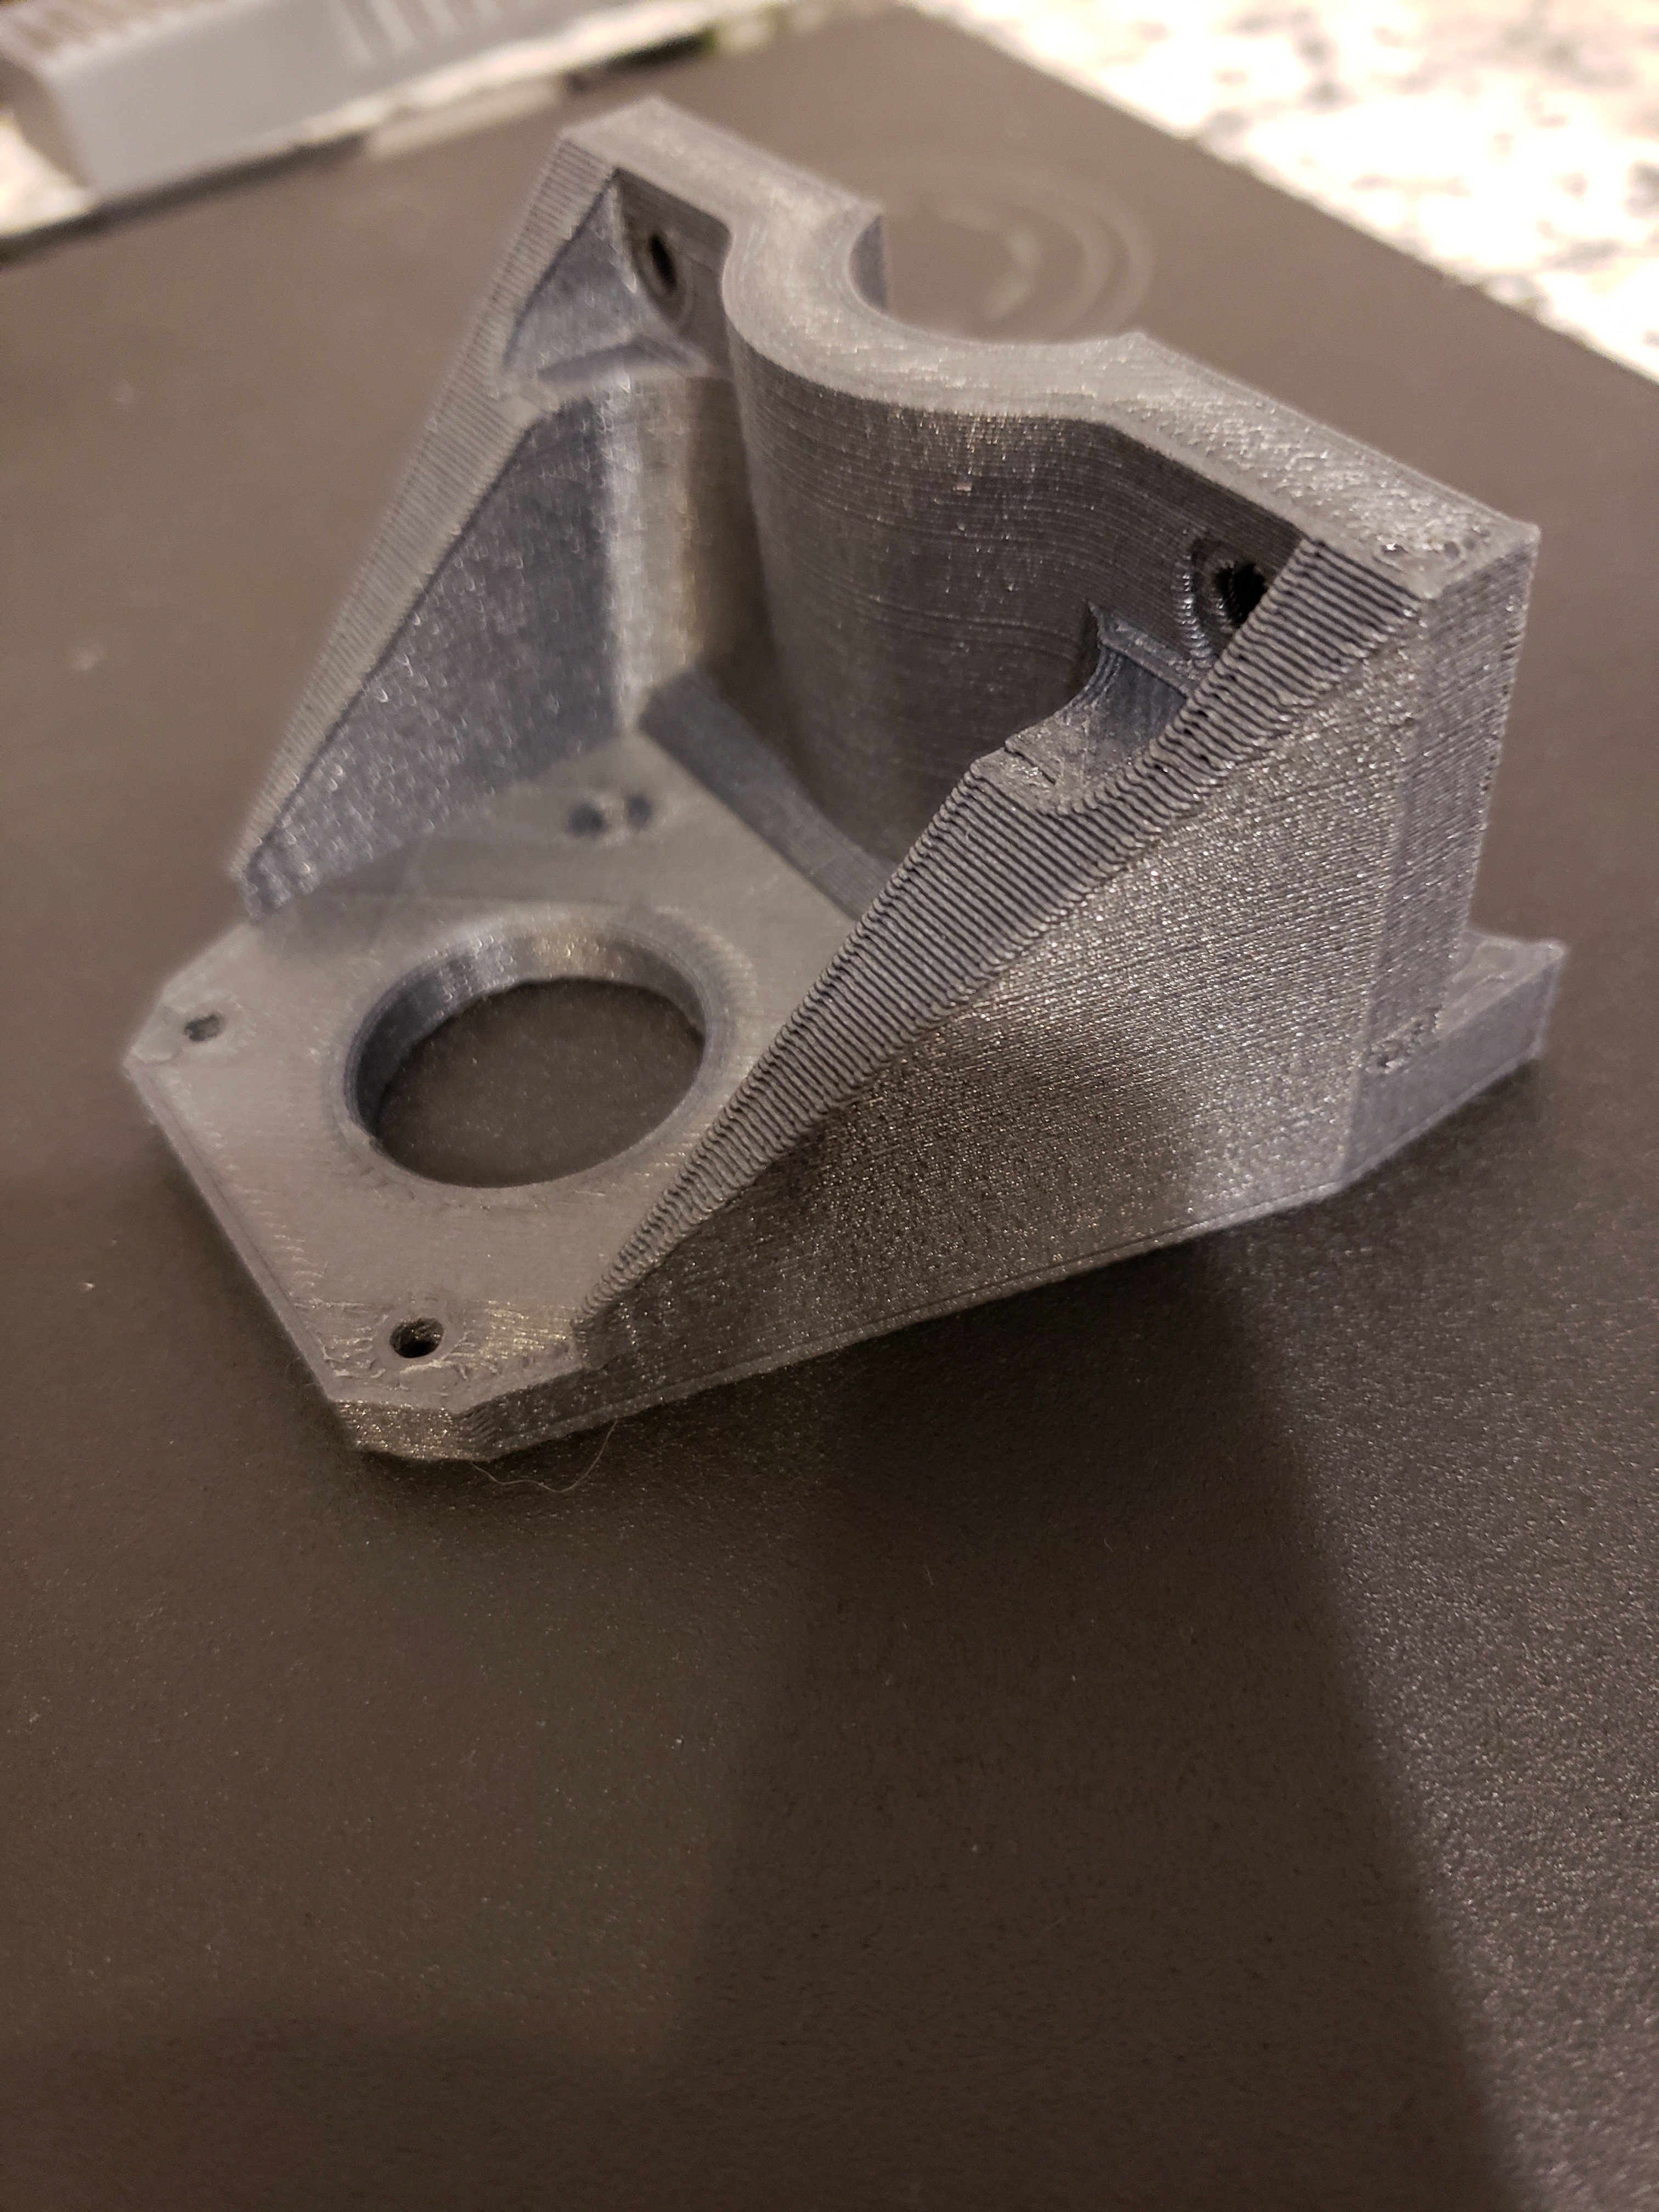 Carbon Fiber Filament: What is it and why should we use it?